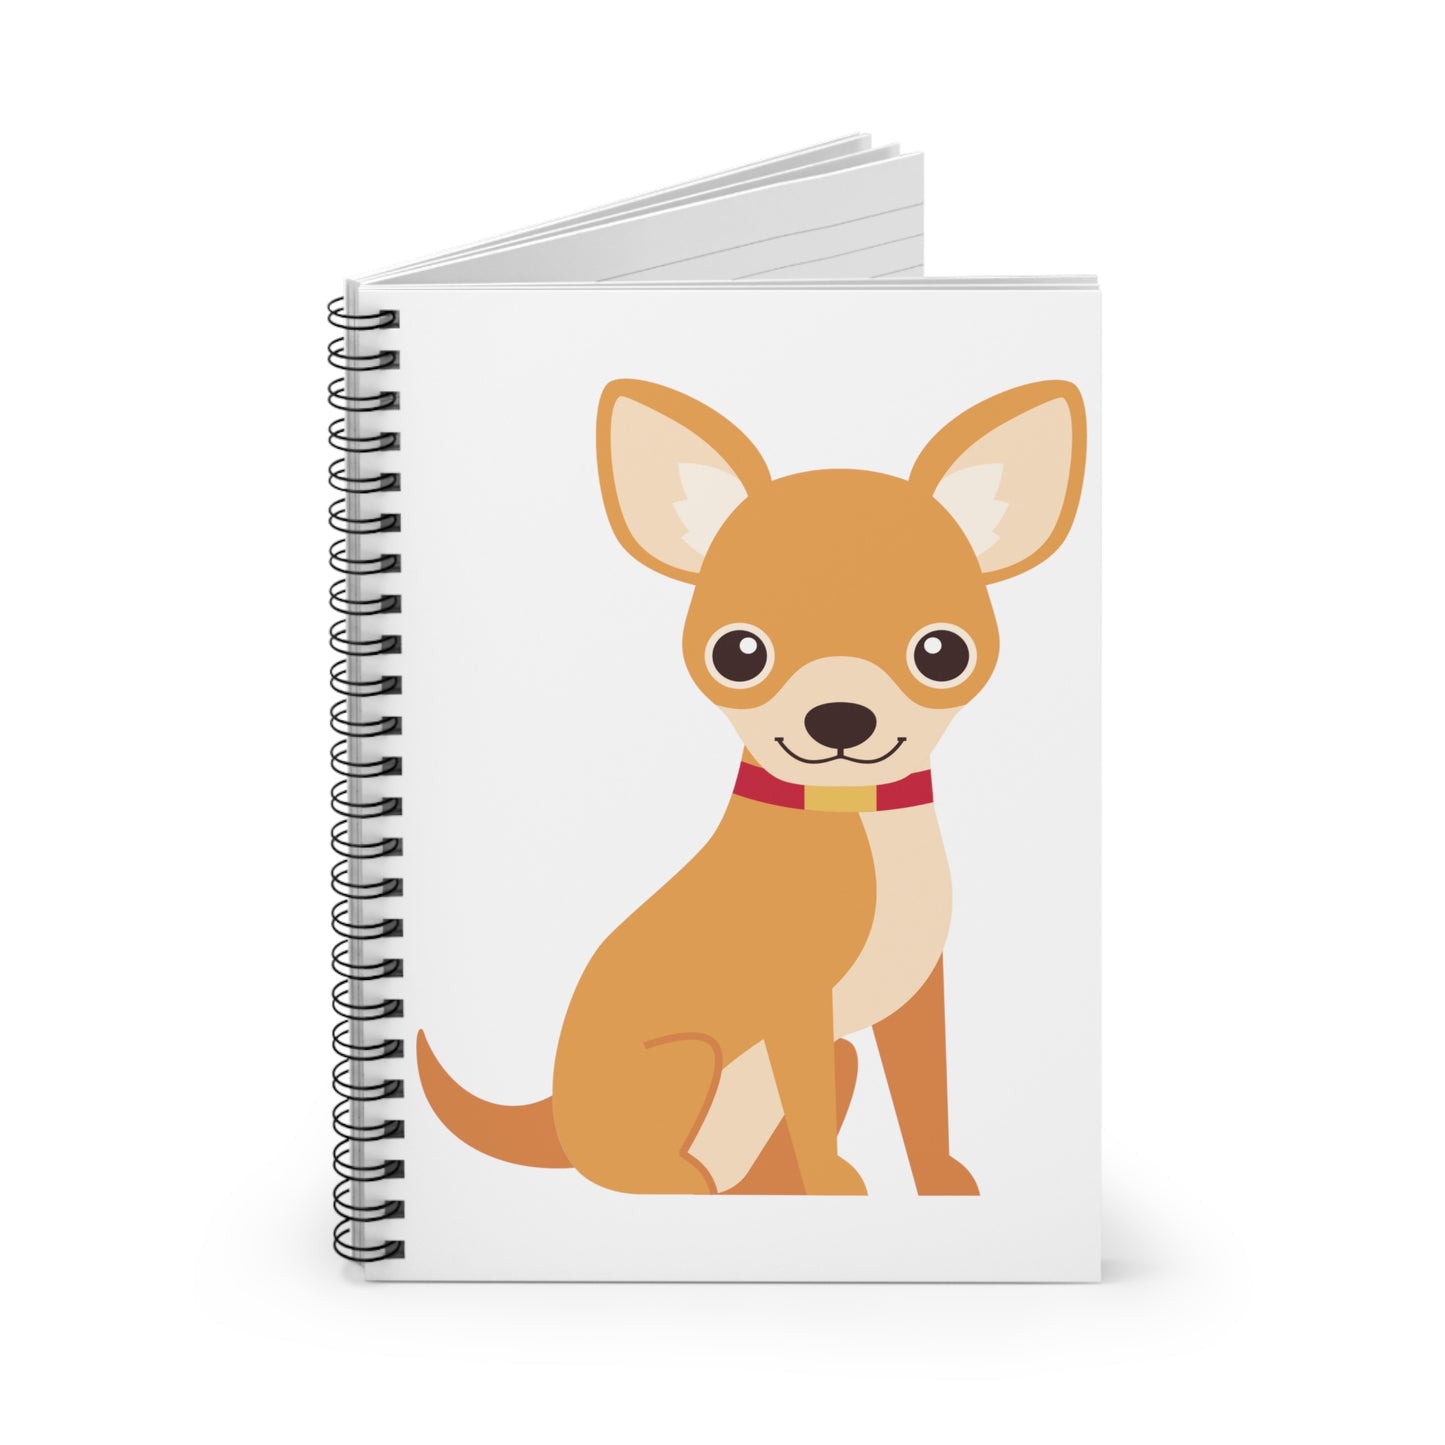 Happy Chihuahua: Spiral Notebook - Log Books - Journals - Diaries - and More Custom Printed by TheGlassyLass